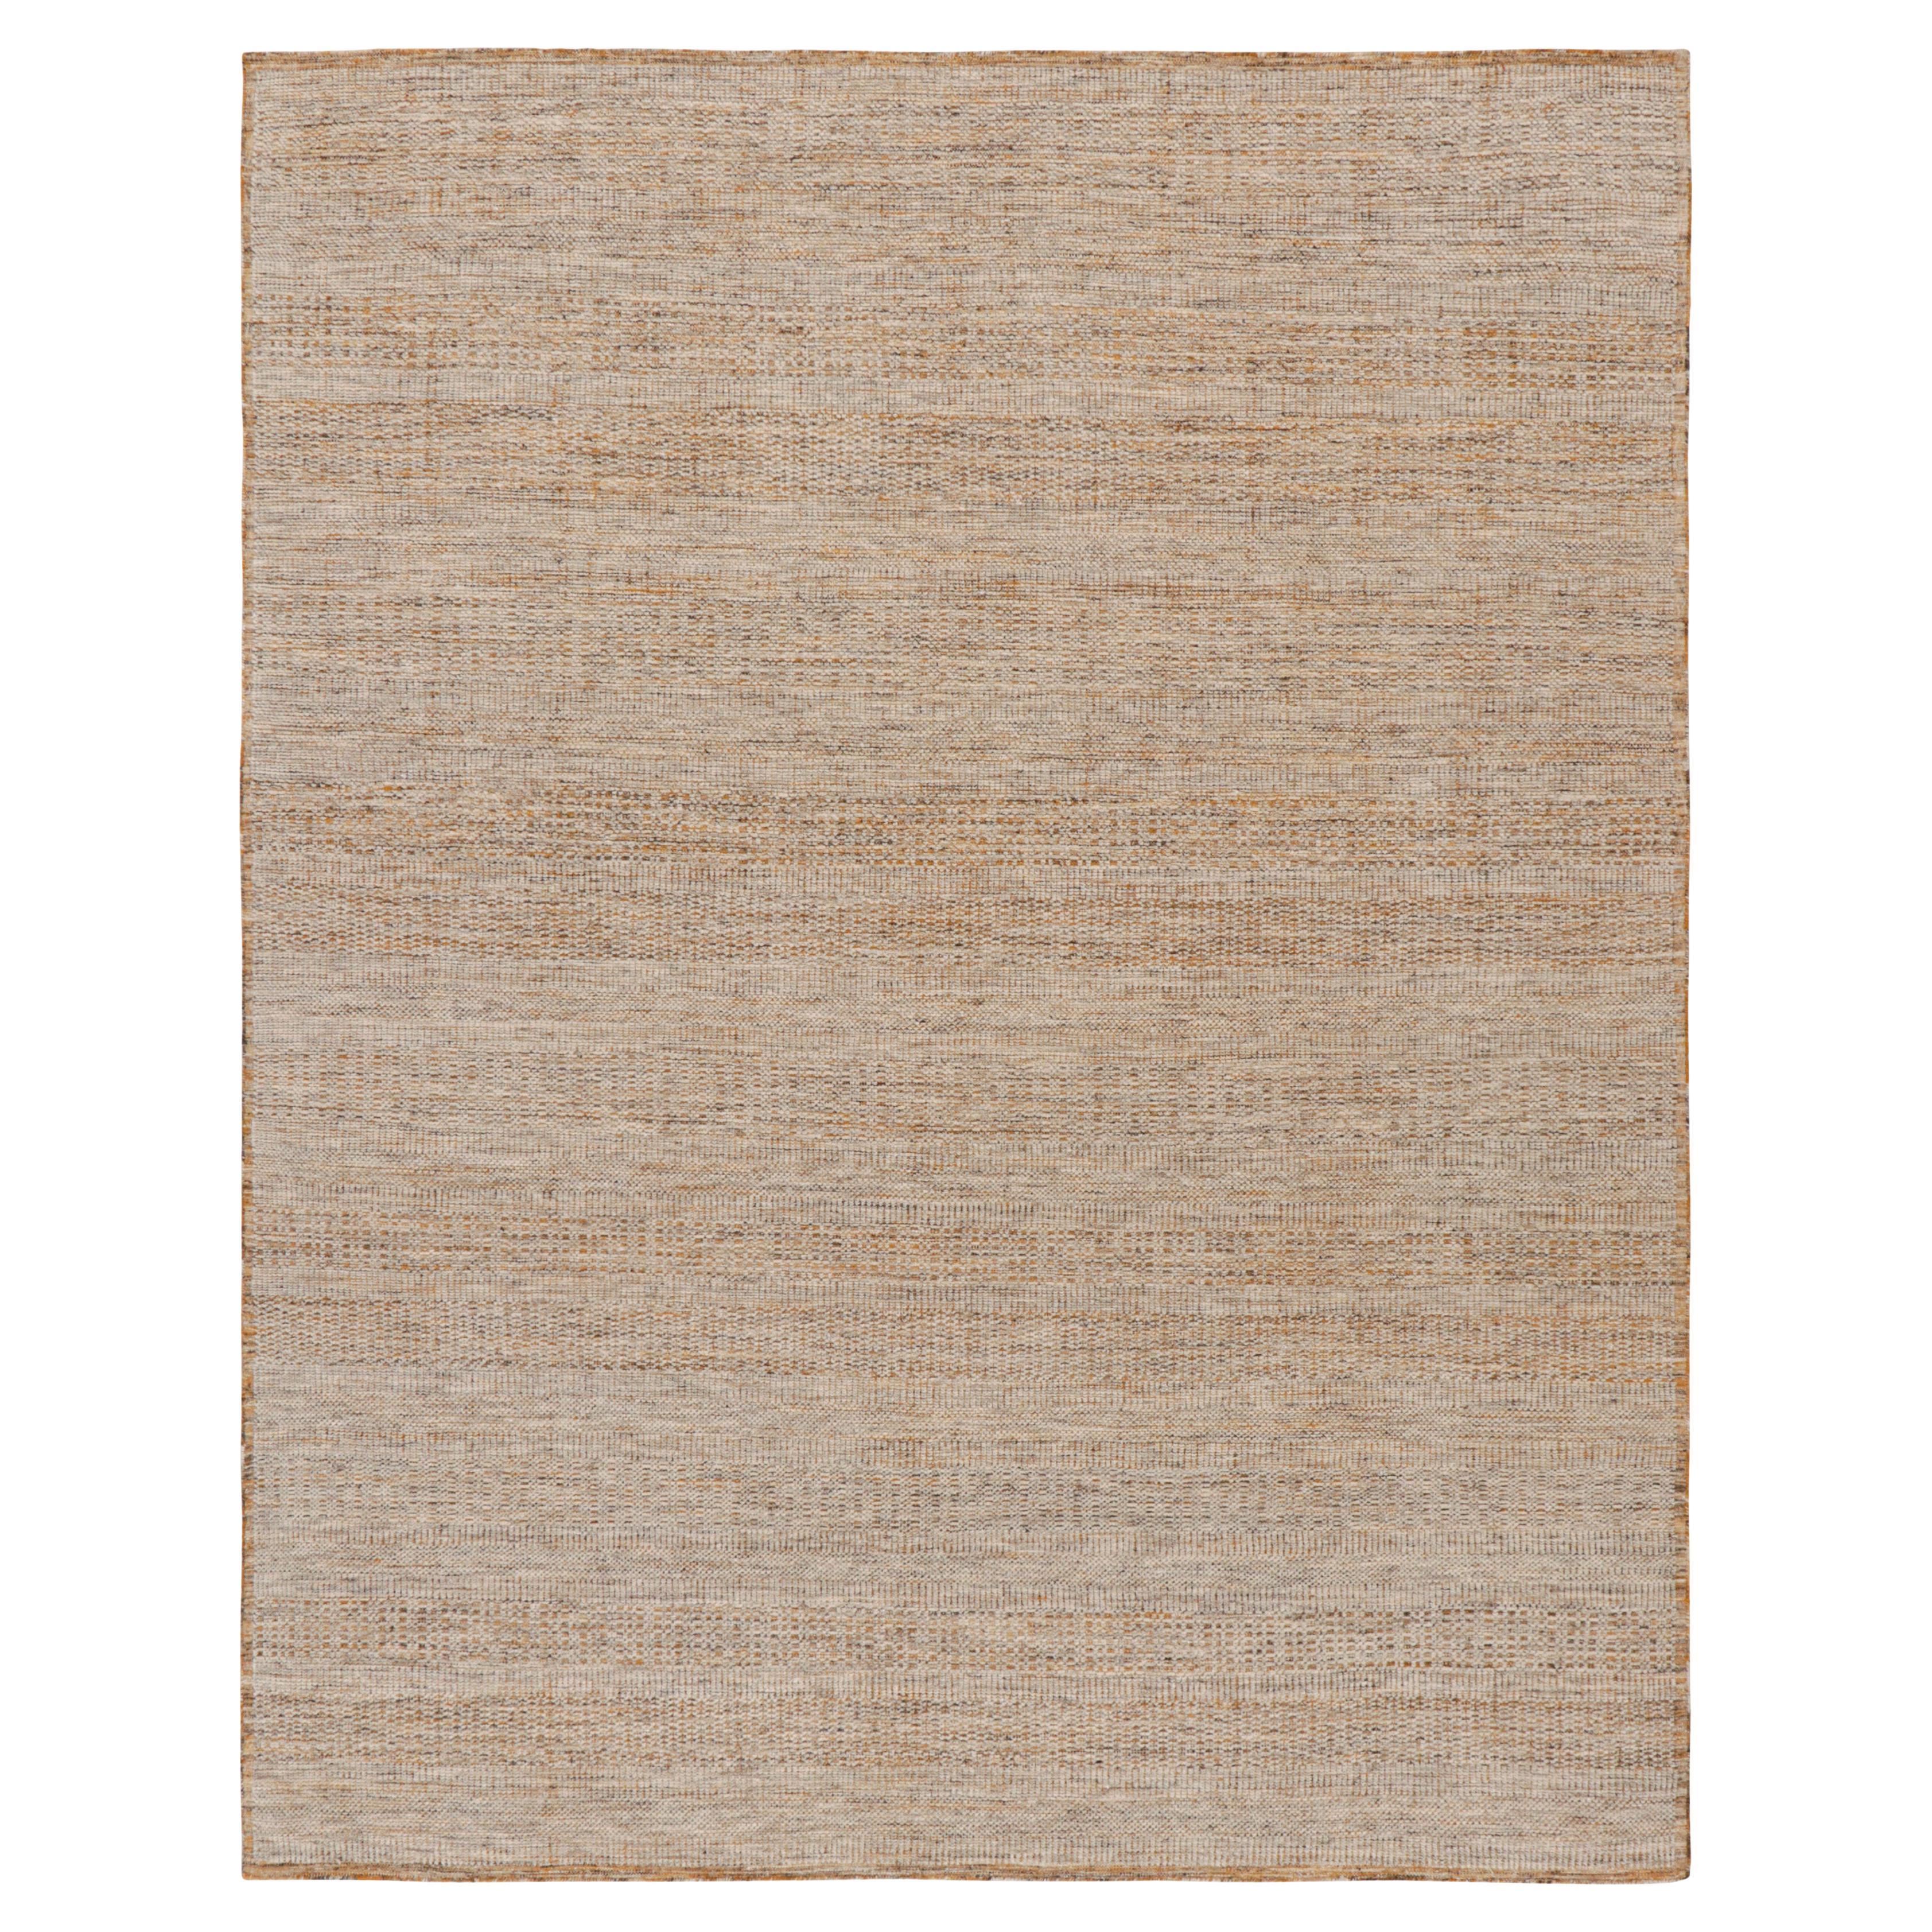 Handwoven in wool, this 8x10 Kilim represents a new boucle-like texture, from an inventive new contemporary flat weave collection by Rug & Kilim in their Modern and Textural rug collections. 

On the Design: 

Beige-brown and earth tone hues